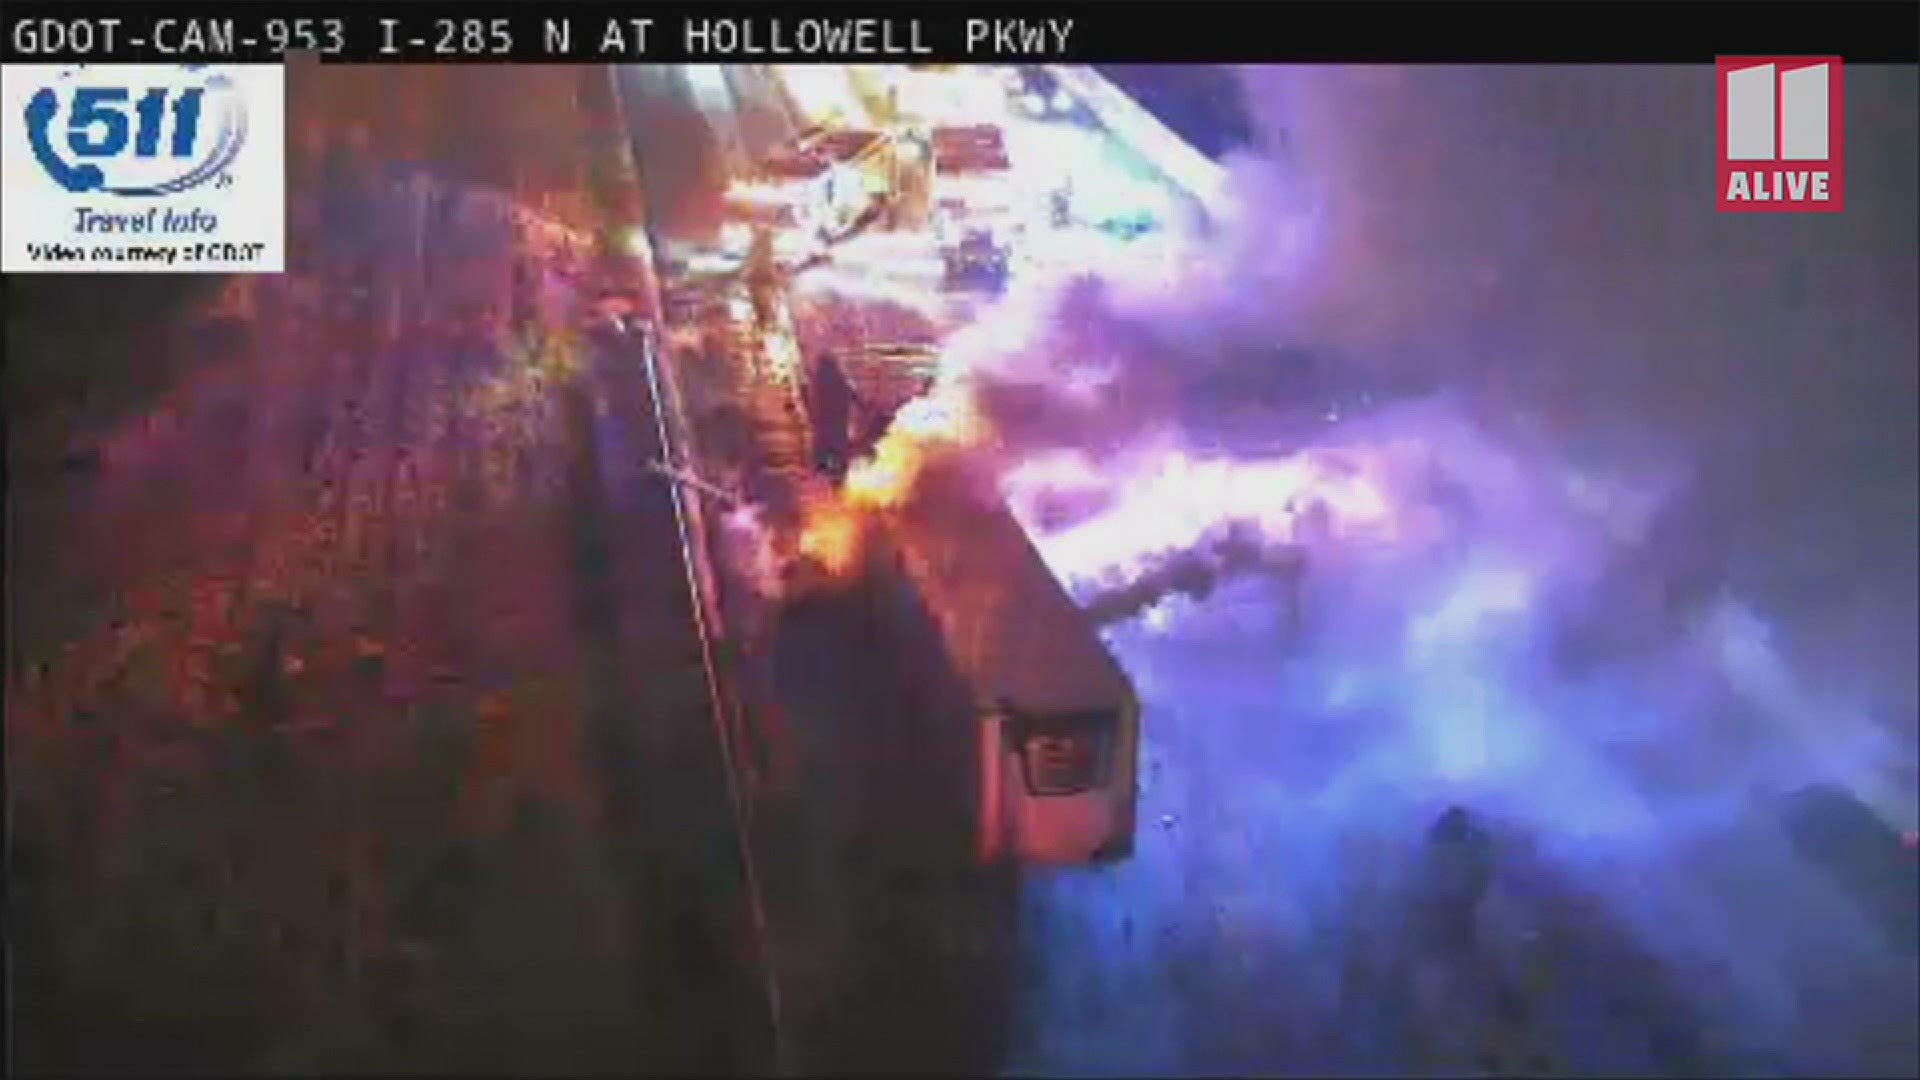 Fire crews are working to put out a large fire from the back of a tractor-trailer on I-285 near Donald Lee Hollowell Parkway.